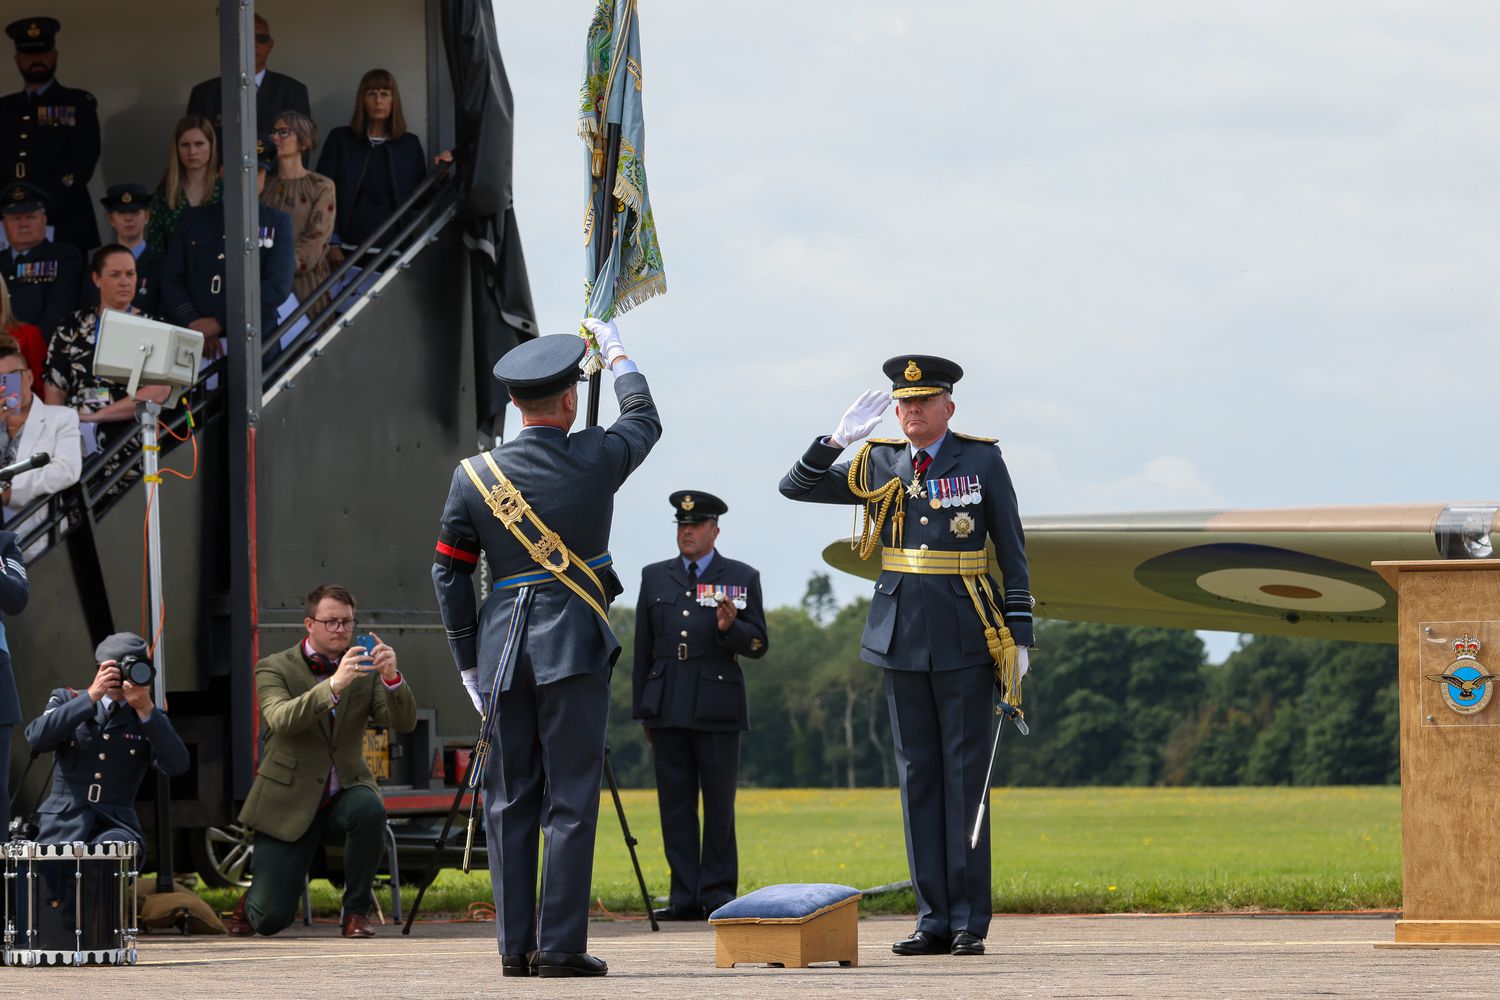 A Reservist from 605 Squadron holds up the new Standard and salutes the reviewing Officer.